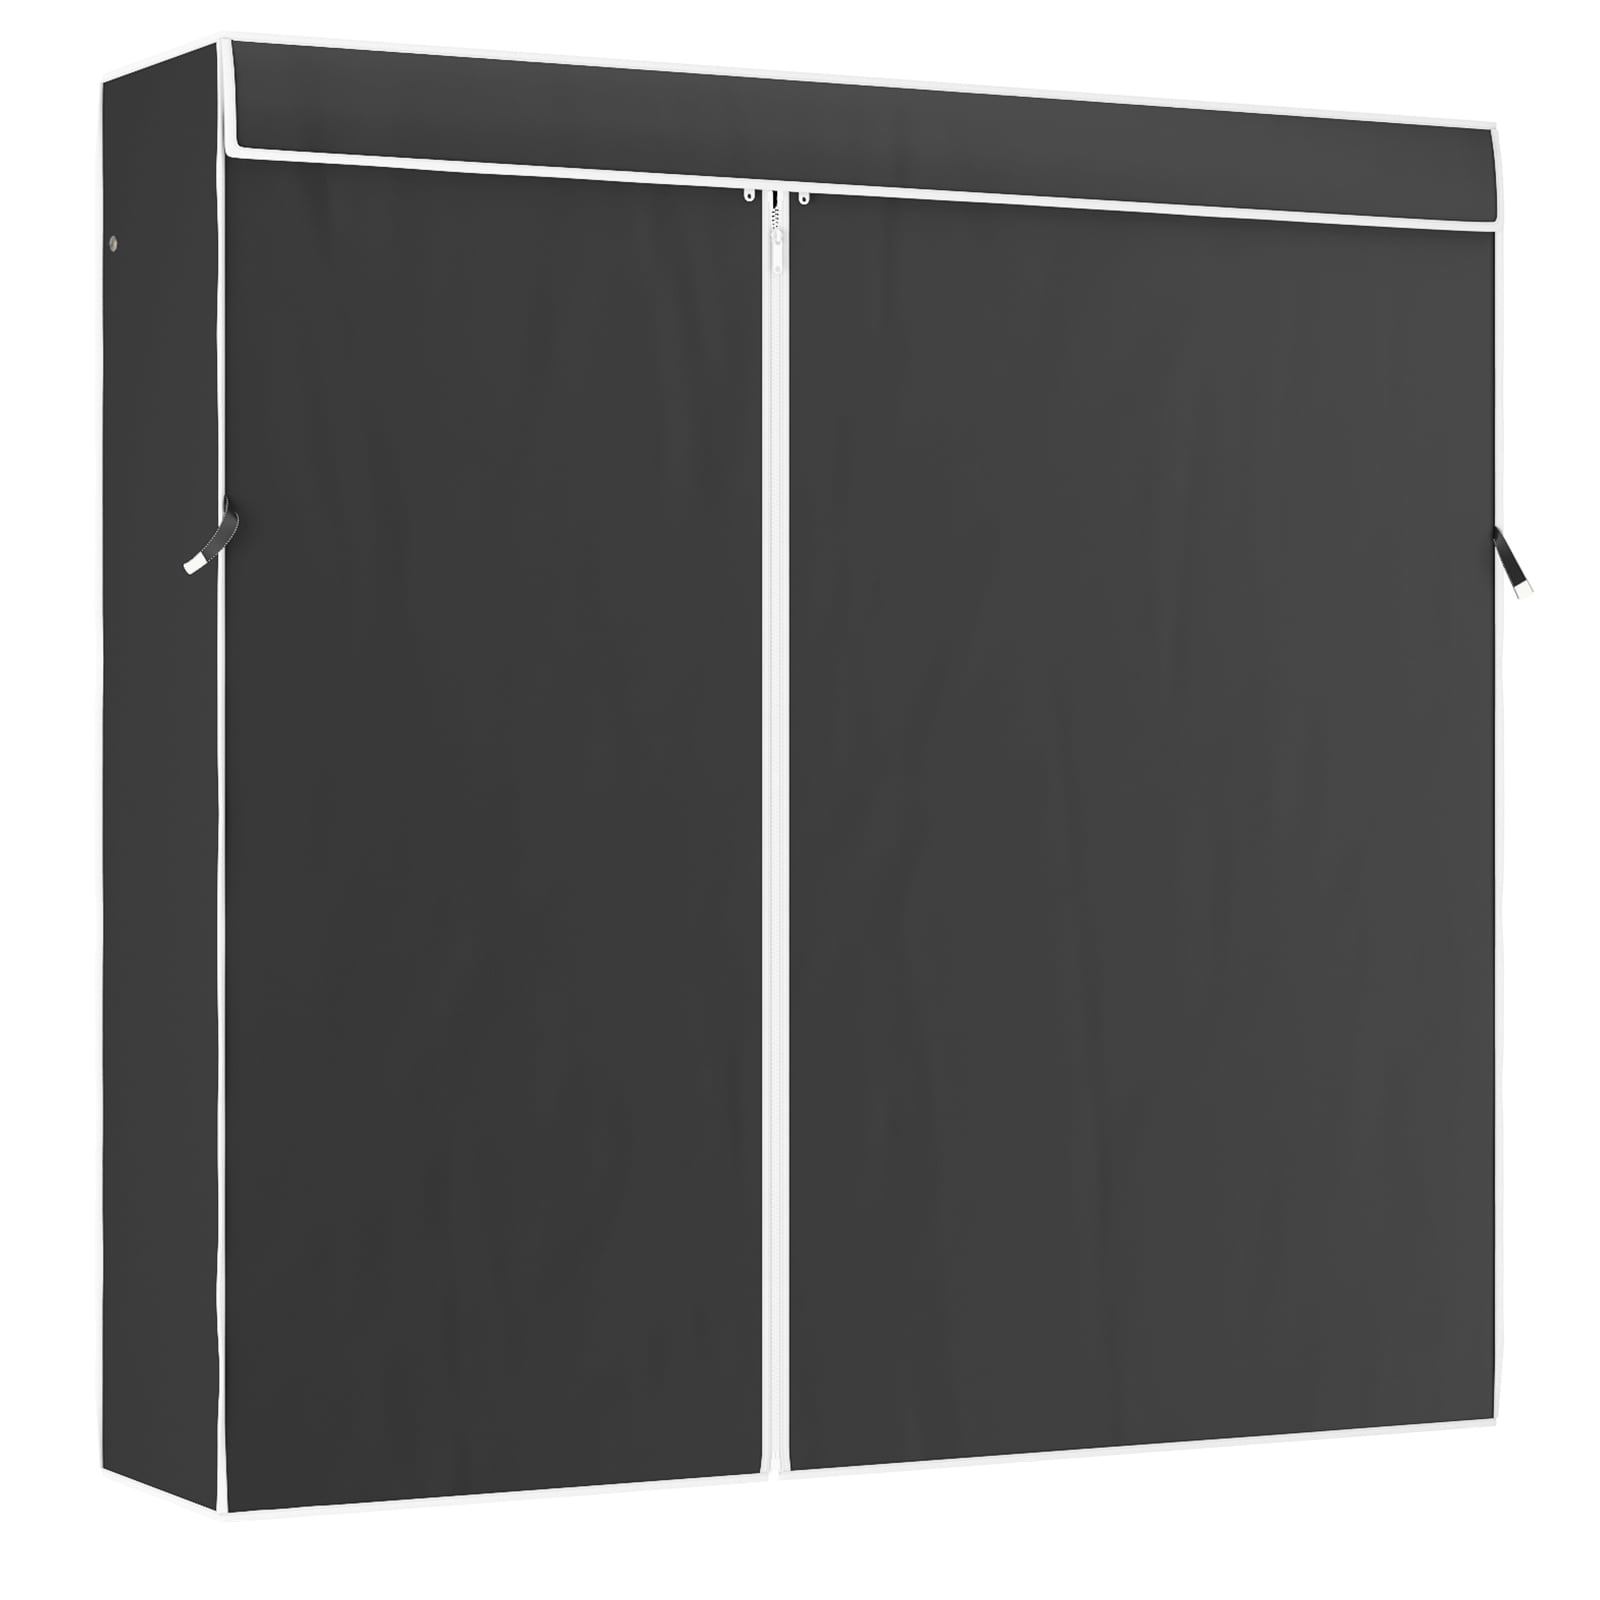 VIPEK V6C Heavy Duty Covered Clothes Rack Portable Wardrobe Closet, Black  Clothing Rack with Black Oxford Fabric Cover, Max Load 780 LBS